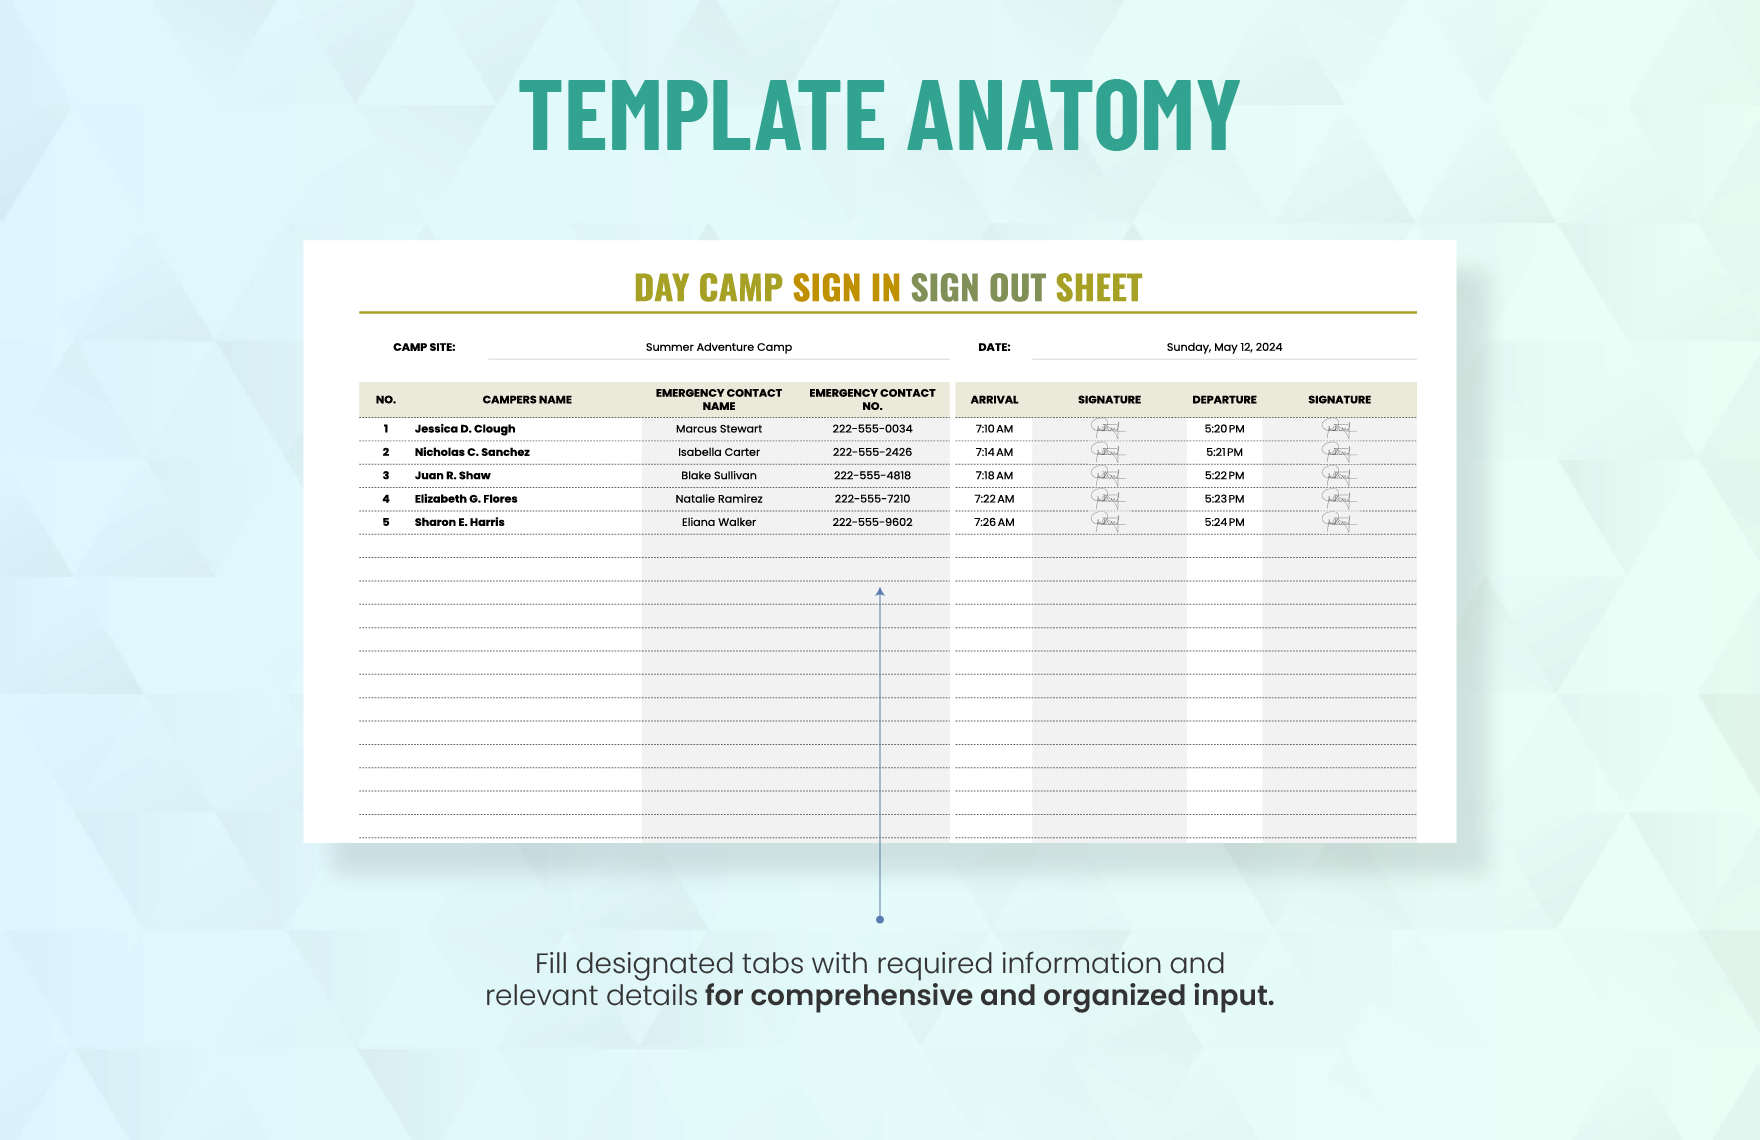 Day Camp Sign in Sign Out Sheet Template